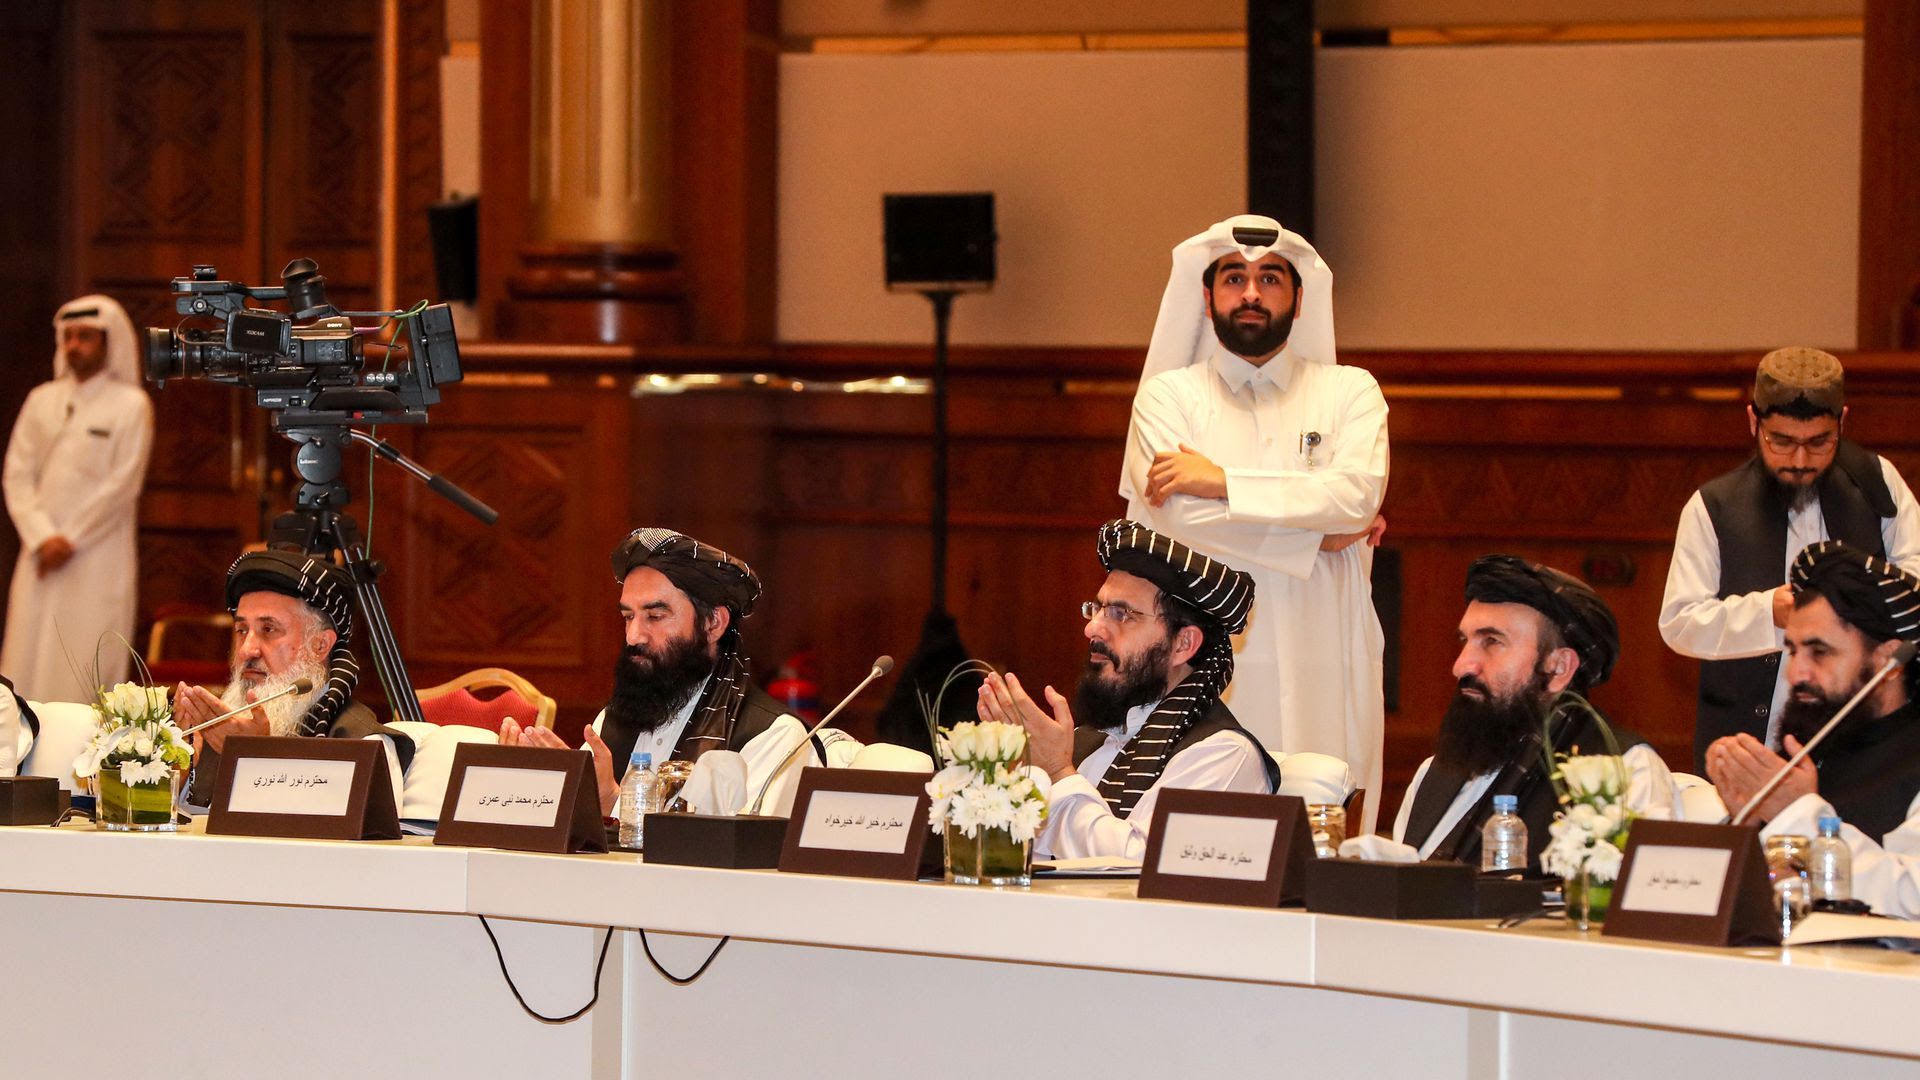 Taliban leaders during peace talks with the U.S. in July in Qatar. Photo: Karim Jaafar/AFP/Getty Images